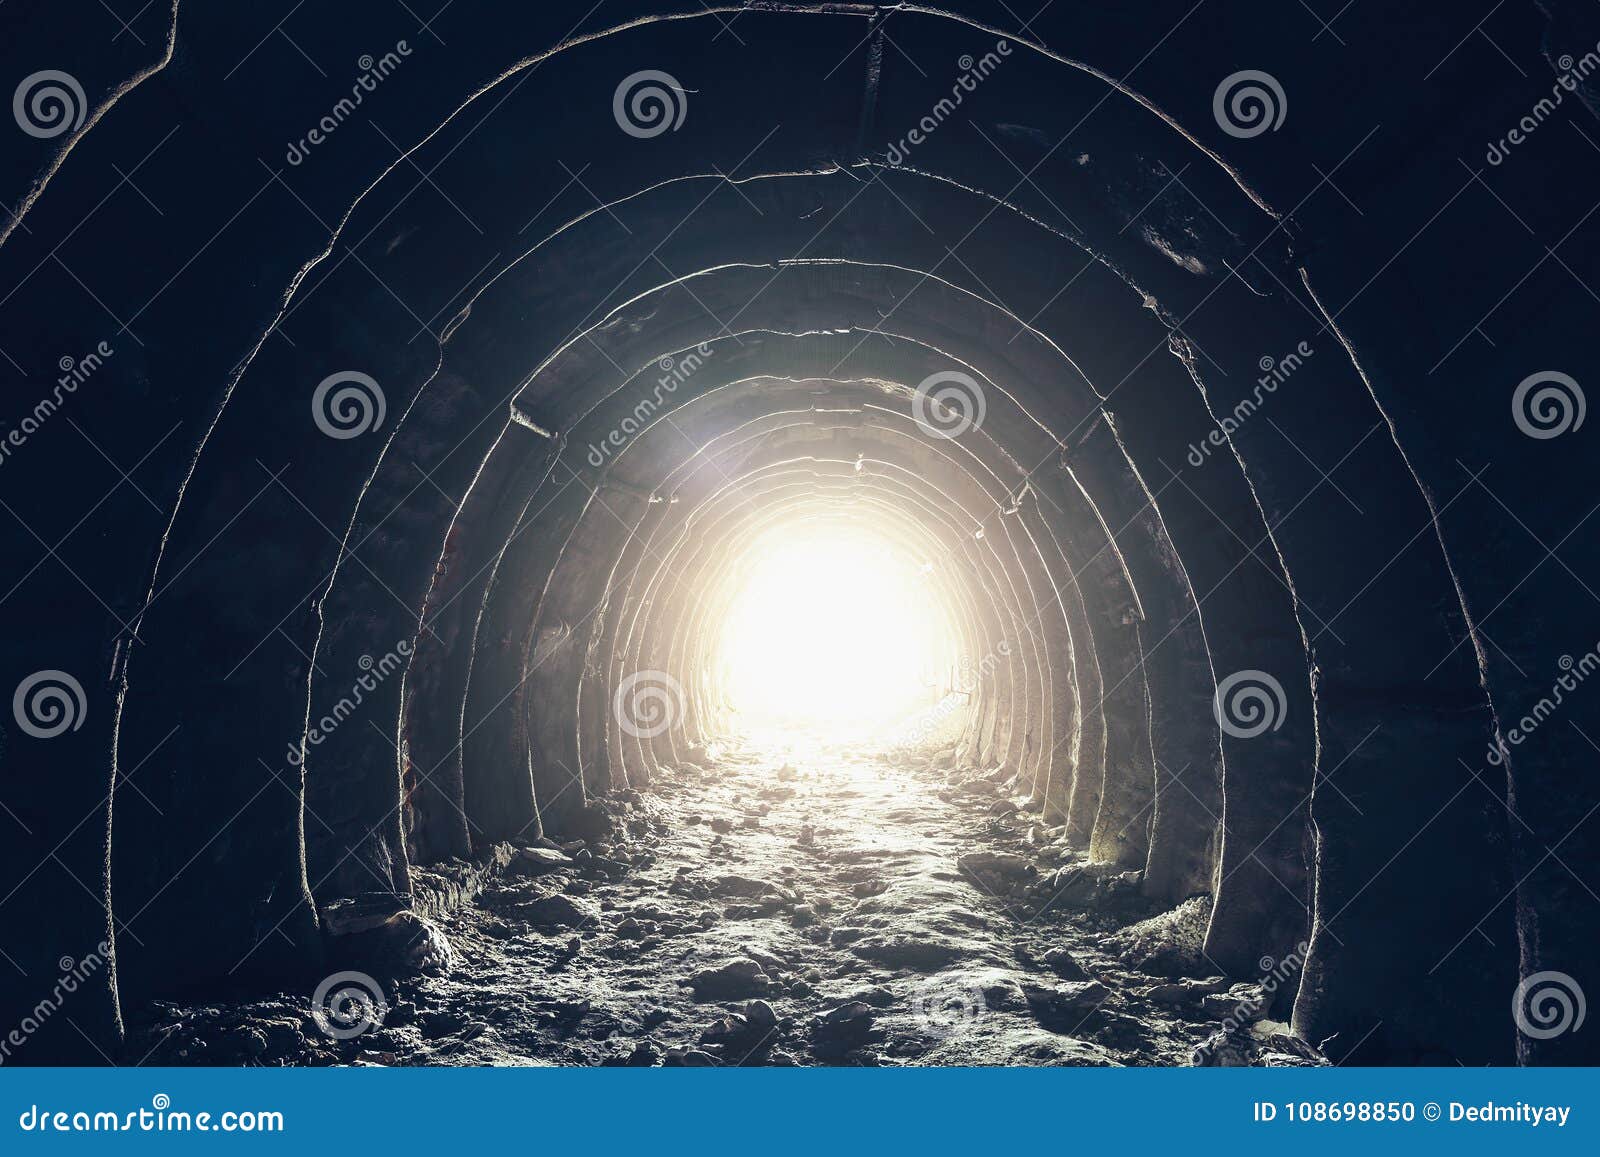 light at the end of dark industrial tunnel, abandoned underground cave or mine, exit or escape to freedom light concept